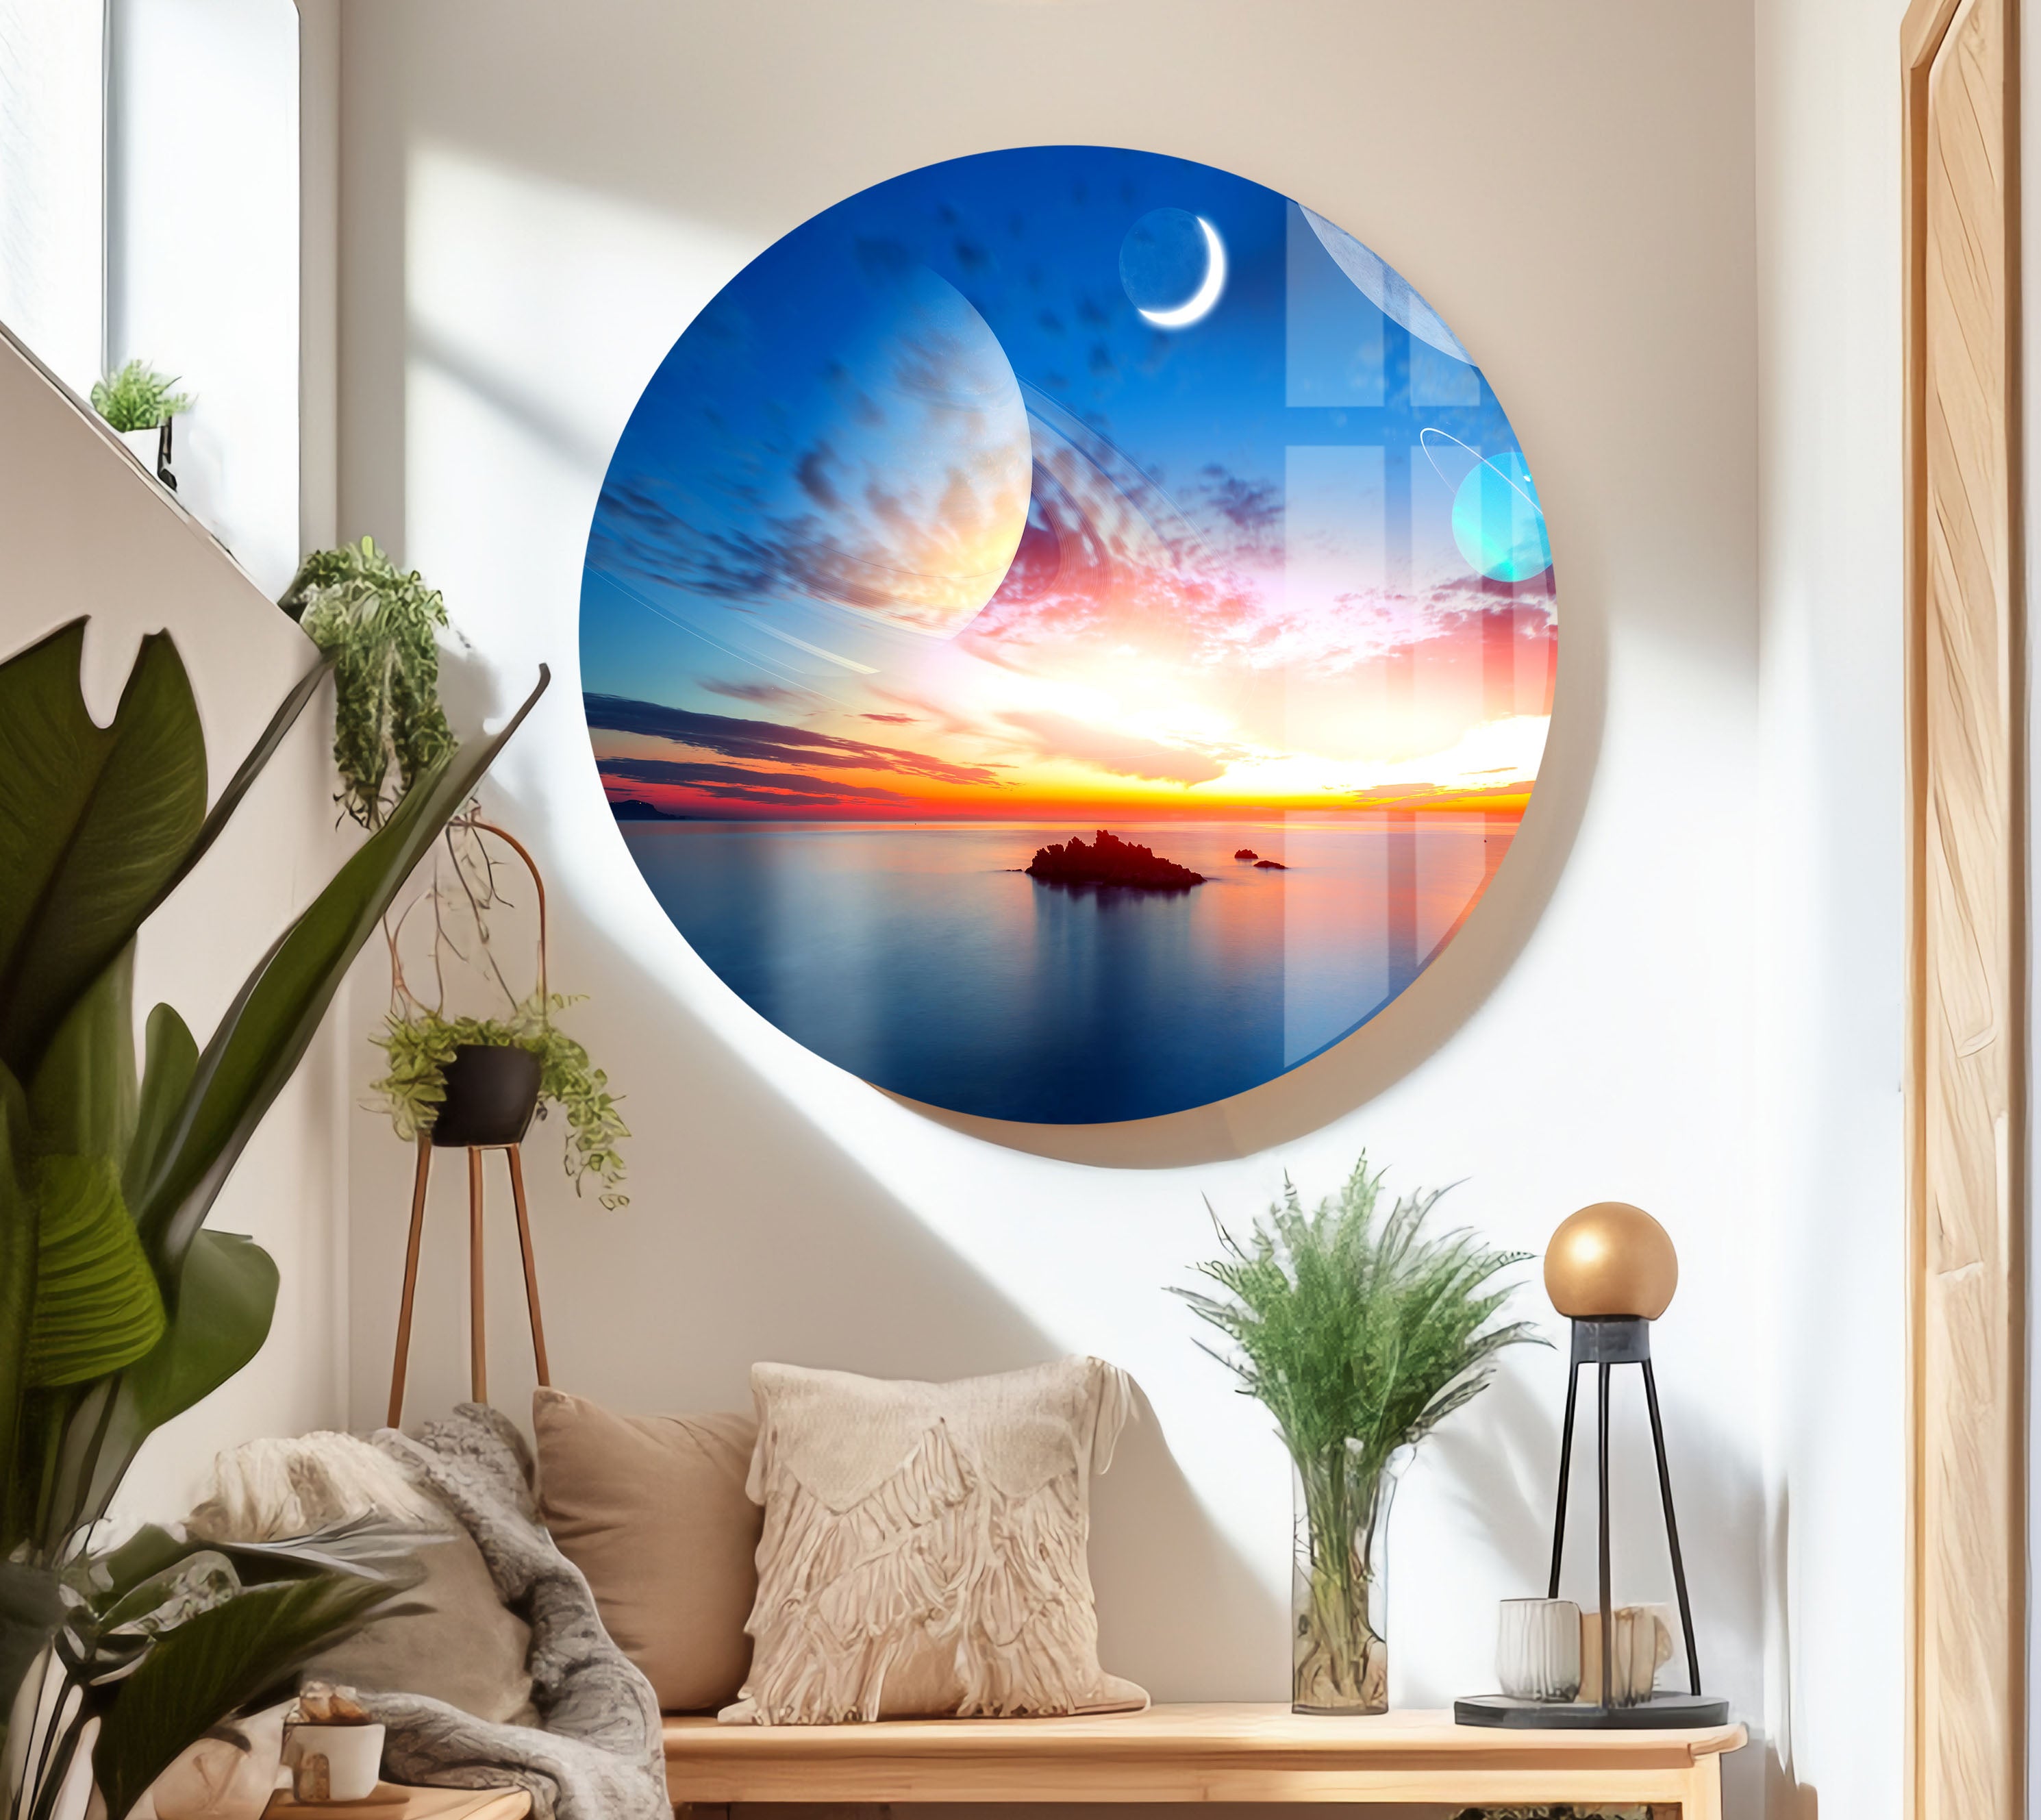 Galaxy and Landscape Tempered Glass Wall Art